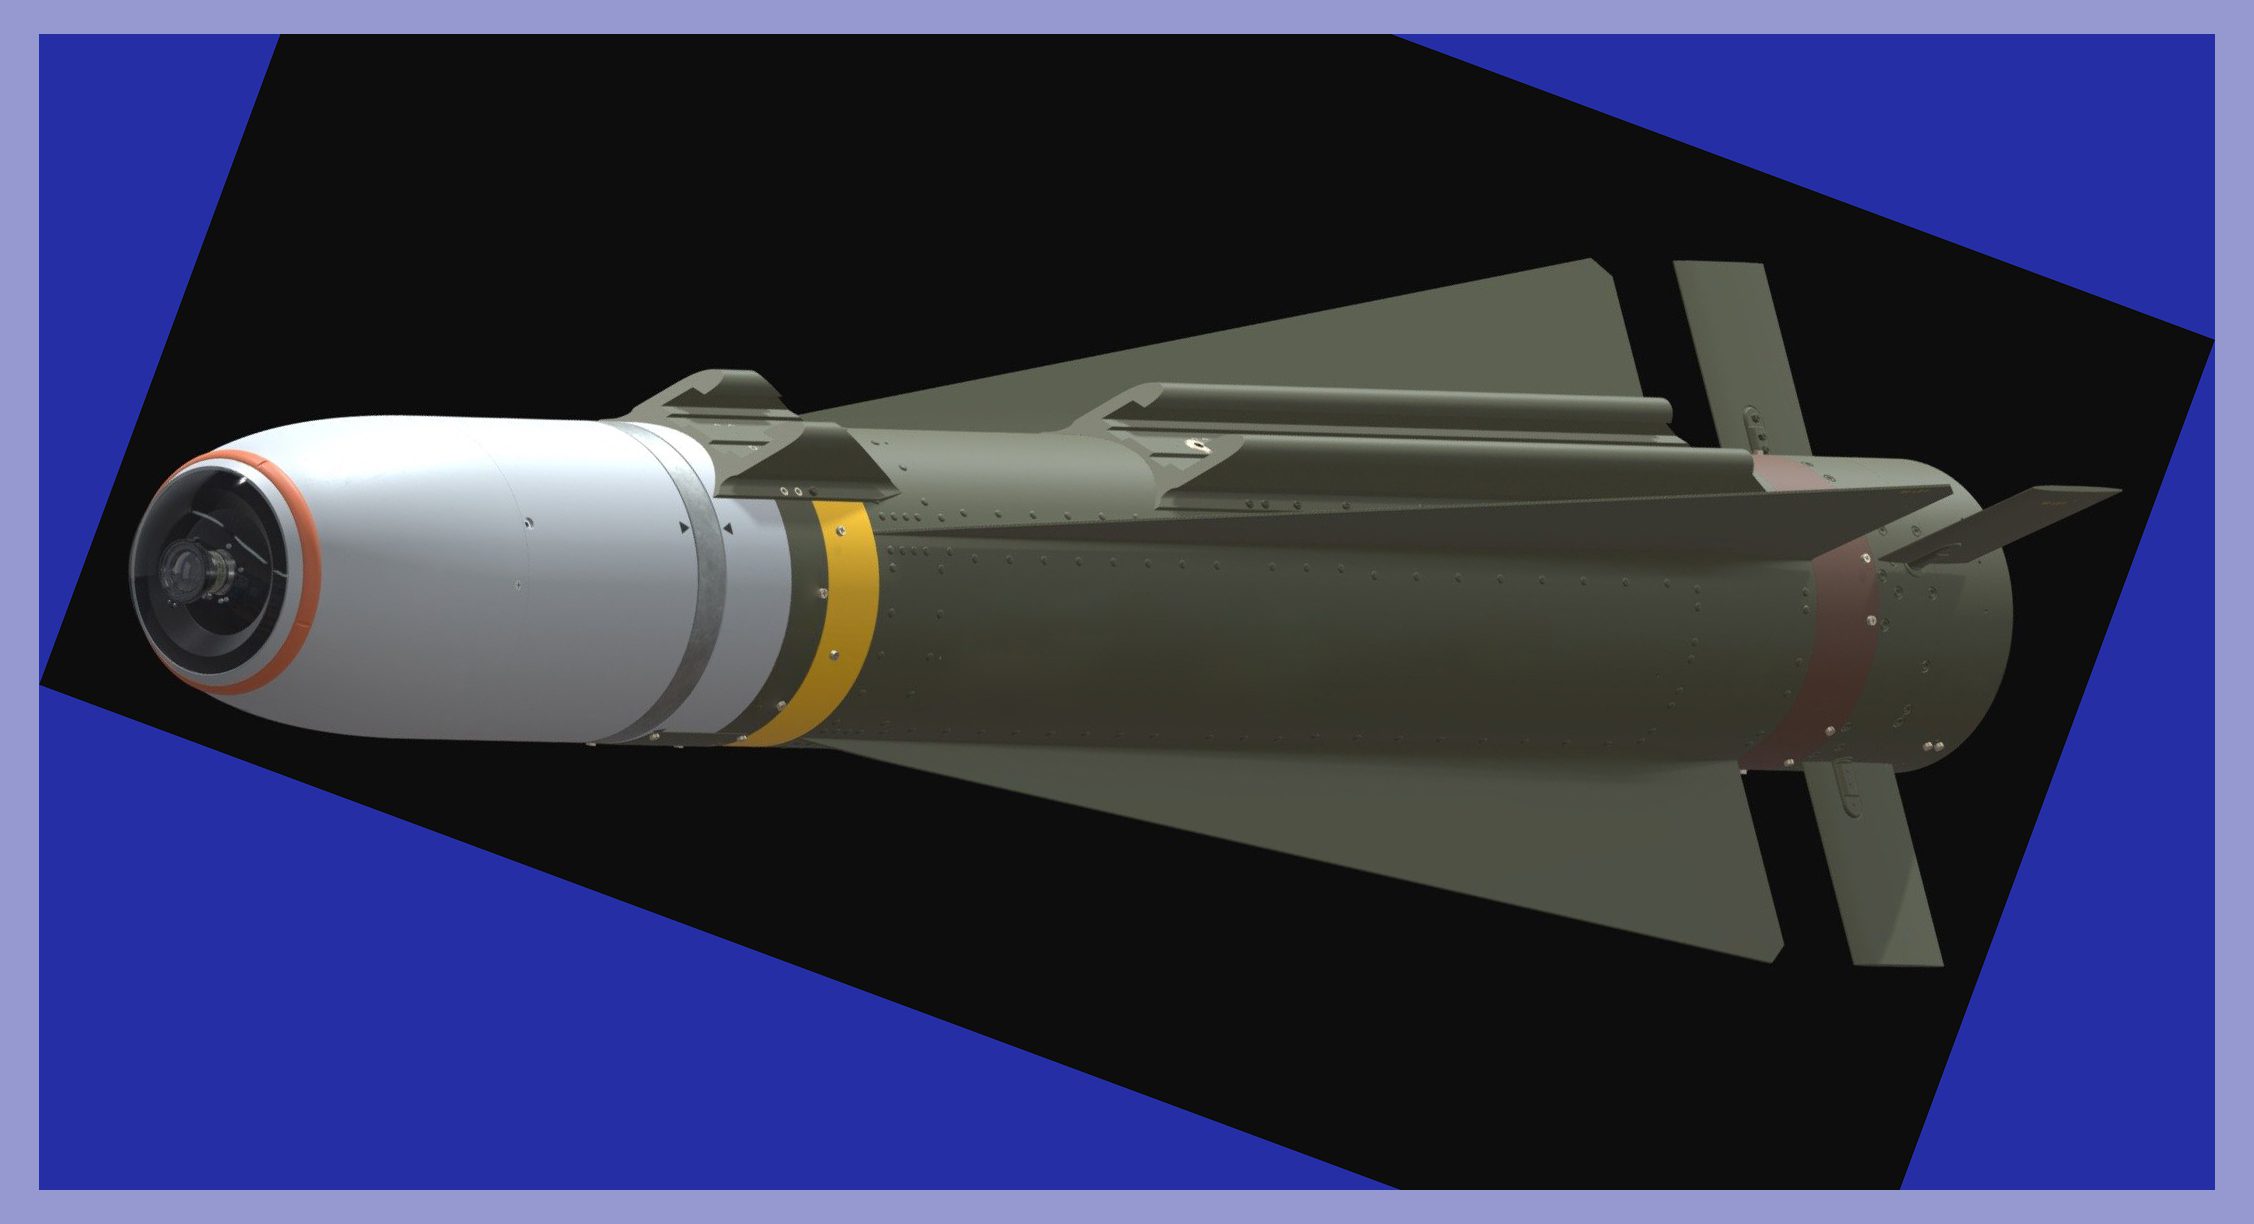 Photo Credit: sketchfab / Let's Delve Into The Details Of The AGM-65 Maverick